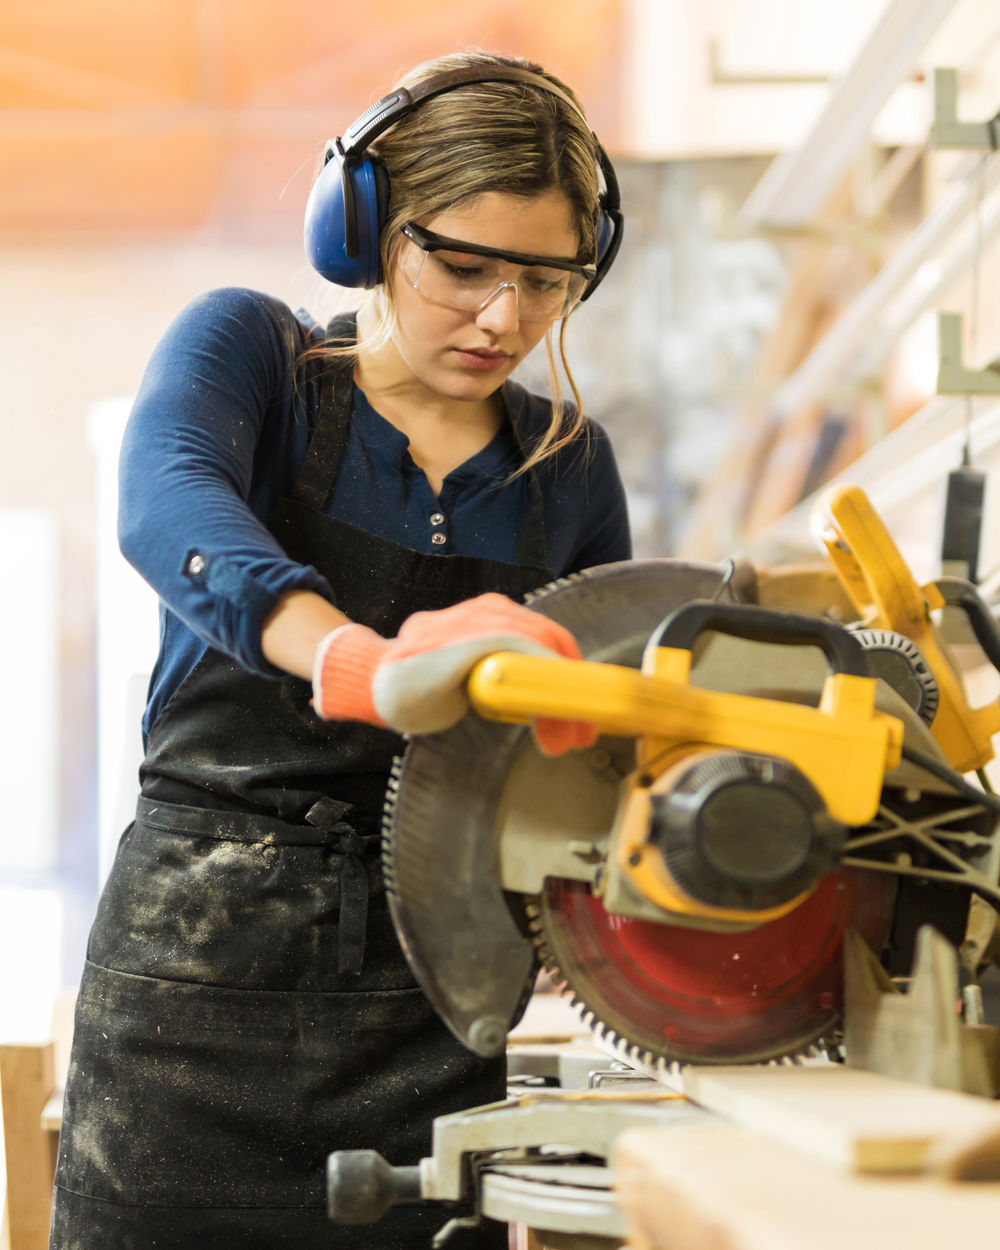  female carpentry student using some power tools for her work